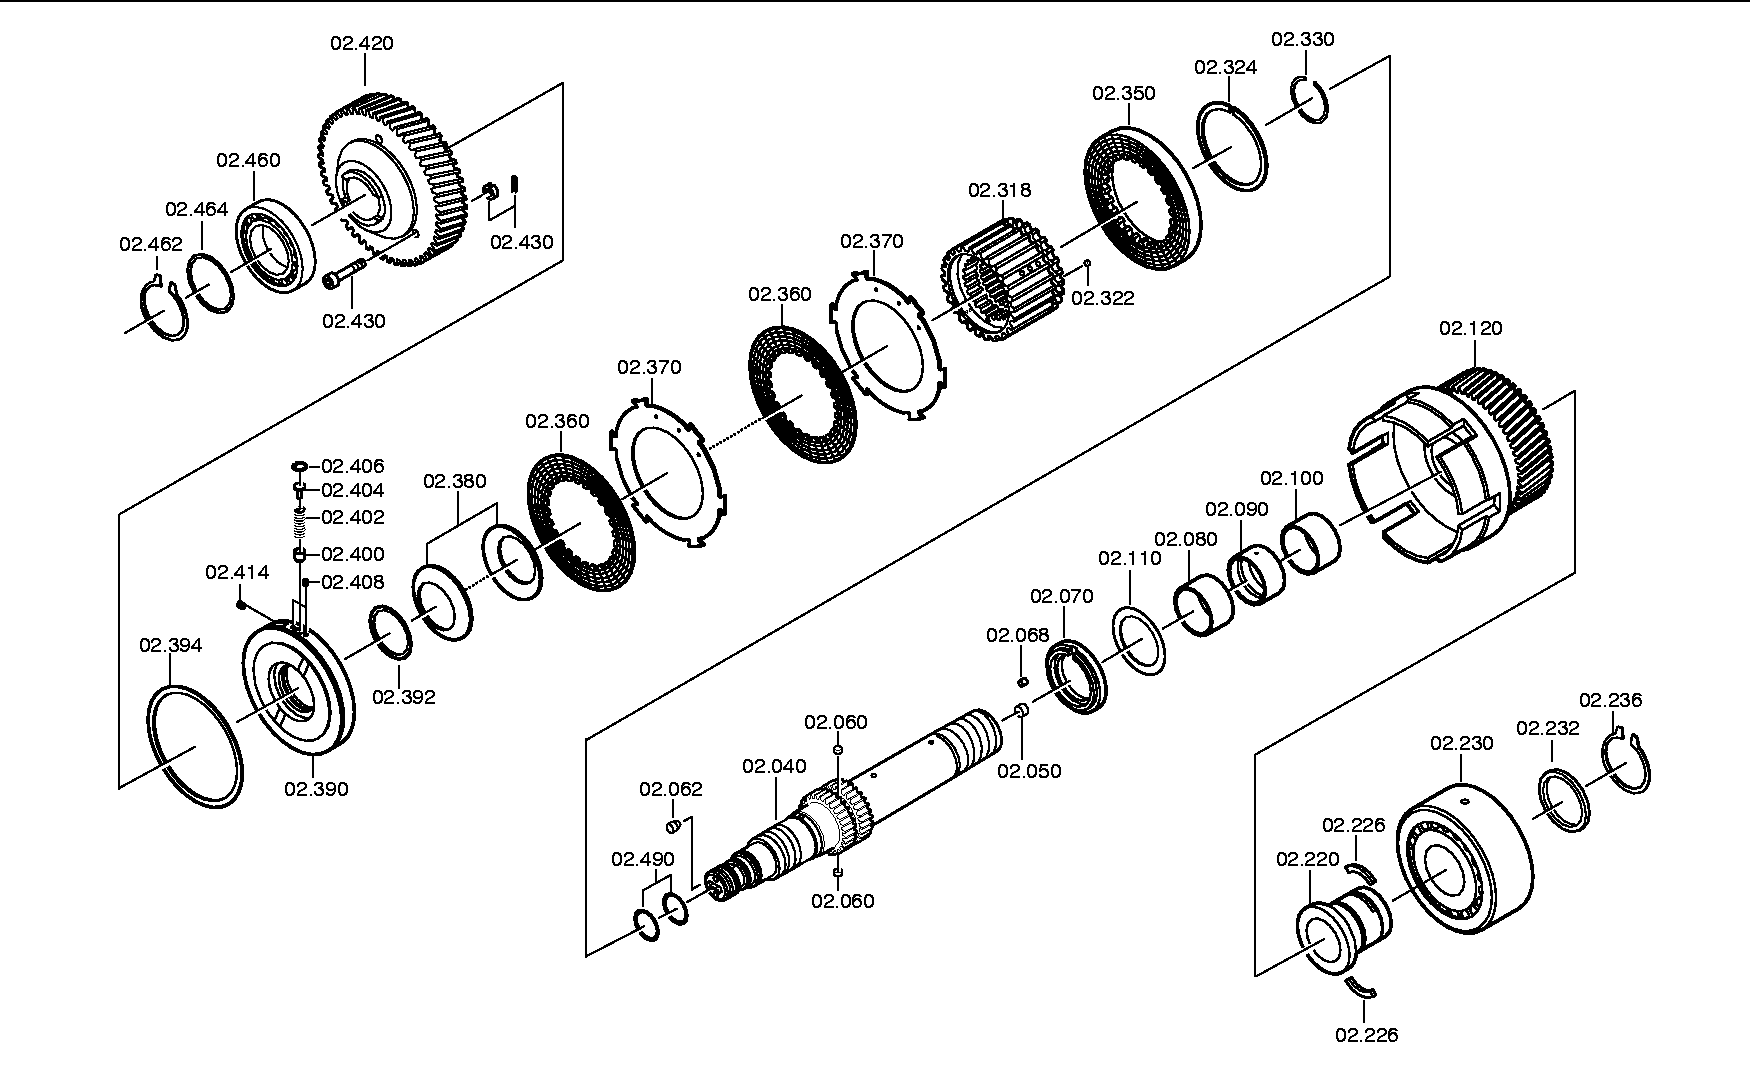 drawing for AGCO F180100090290 - SET SCREW (figure 5)